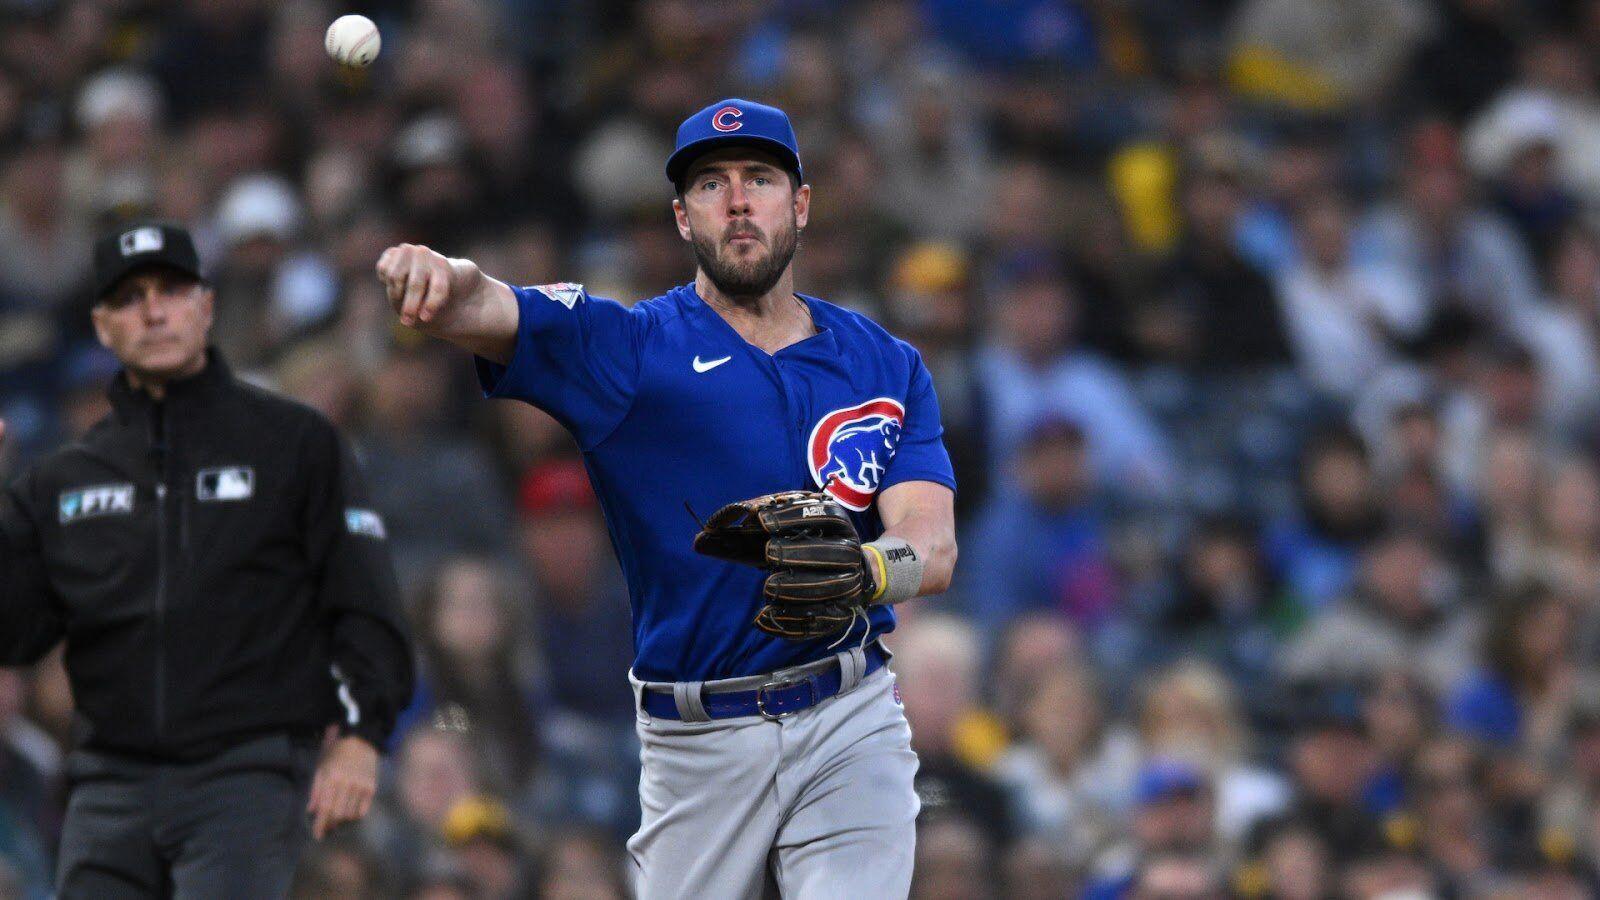 Marlins vs Cubs MLB Predictions, Odds & Best Bets (4/19): Expect a Chi-town Blowout